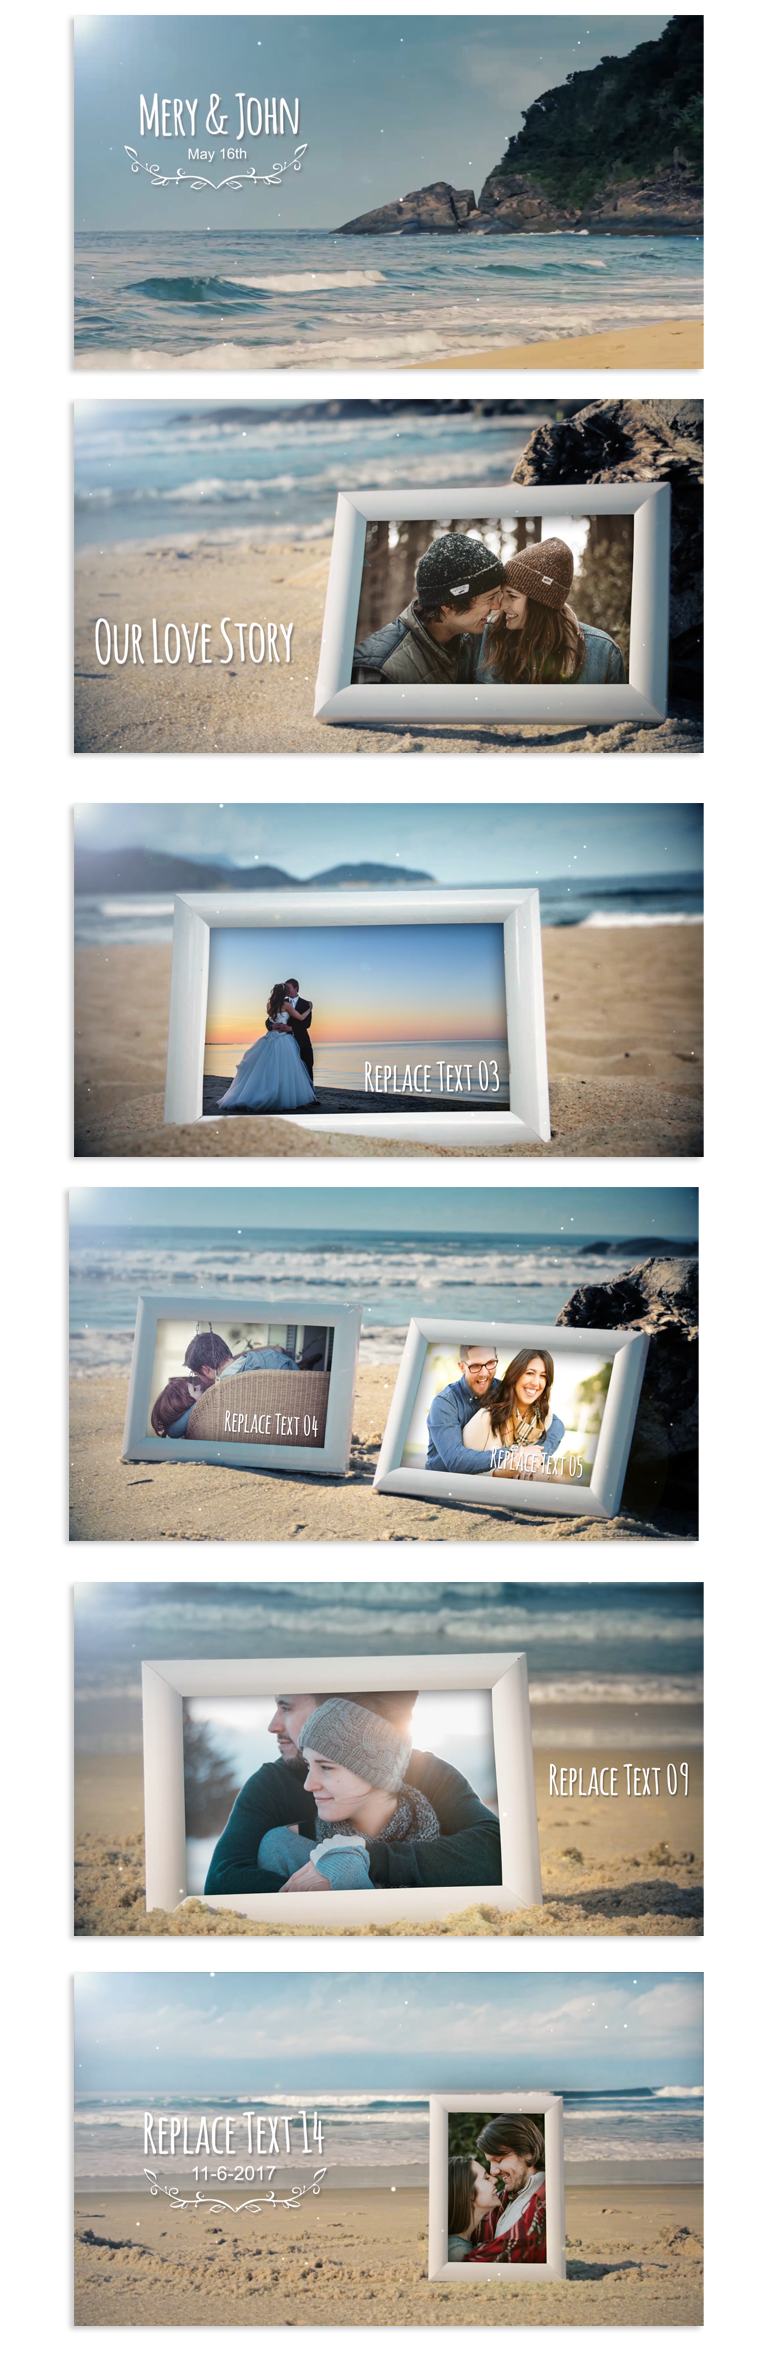 BeachGalleryImages.png?dl=0